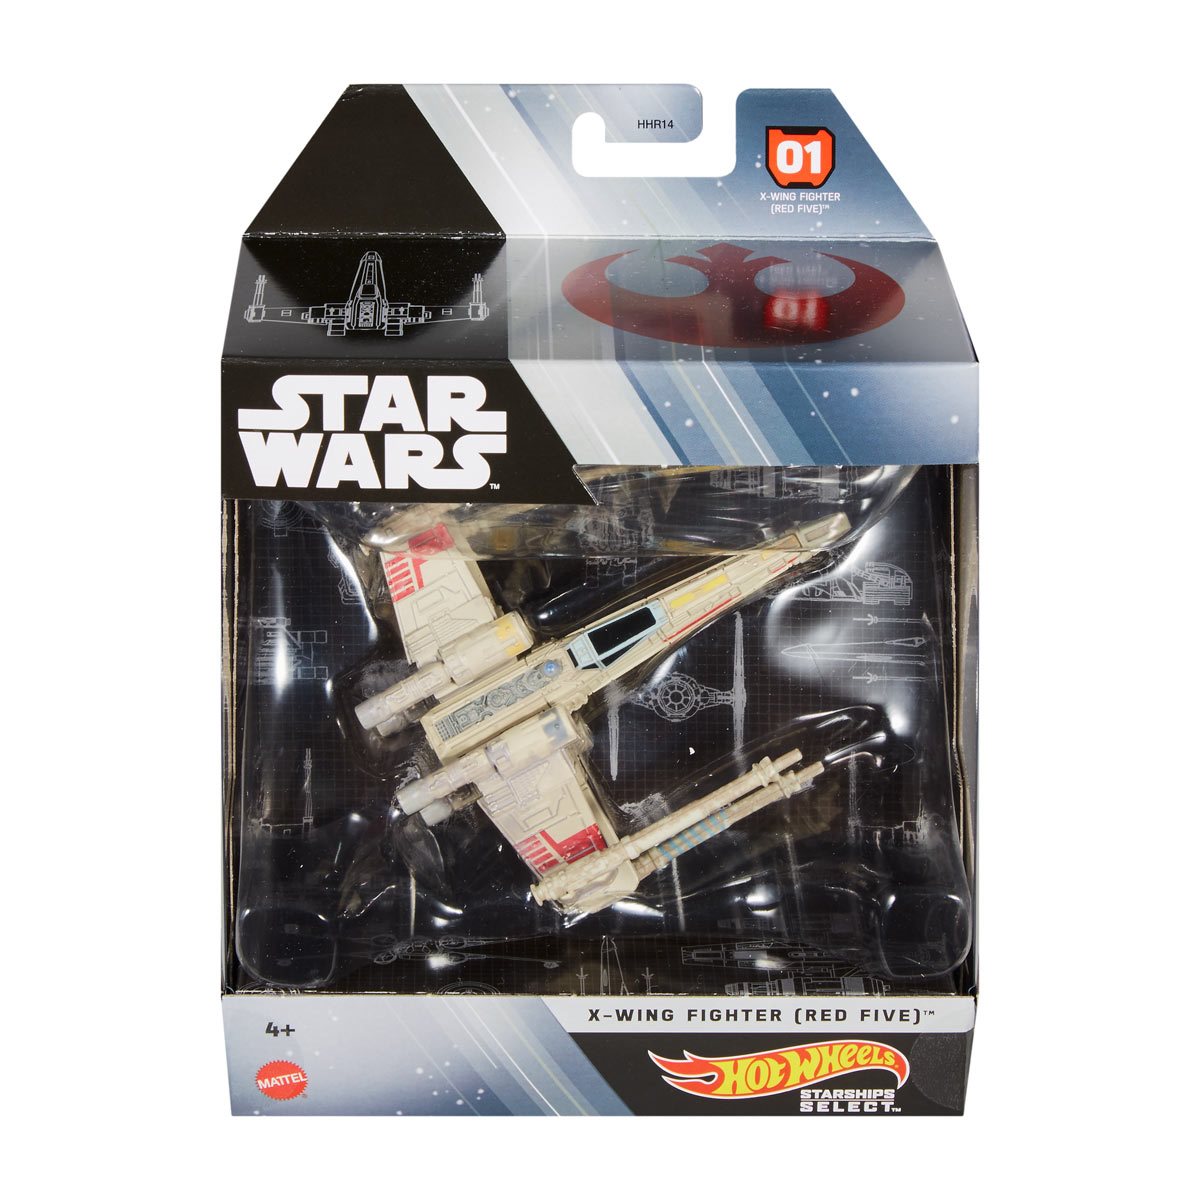 Star Wars Hot Wheels Starships X-Wing Fighter (Red Five)